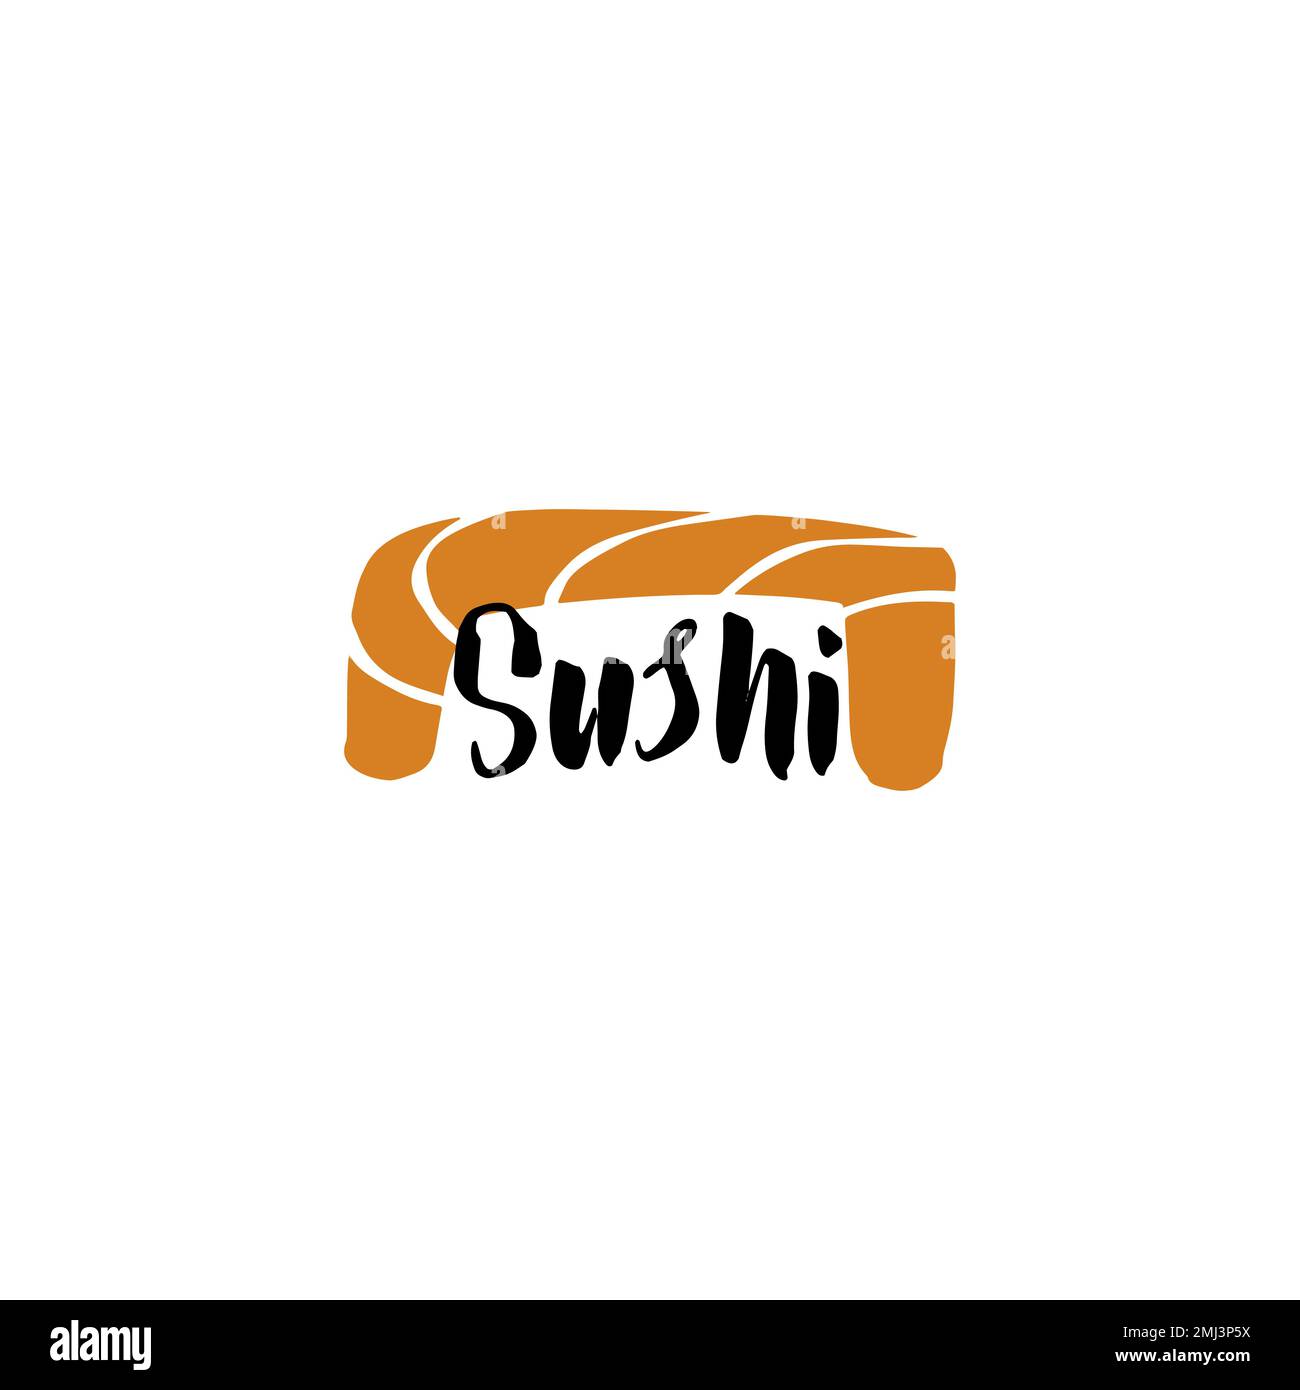 Stylized illustration of sushi logo with lettering and salmon Stock Vector